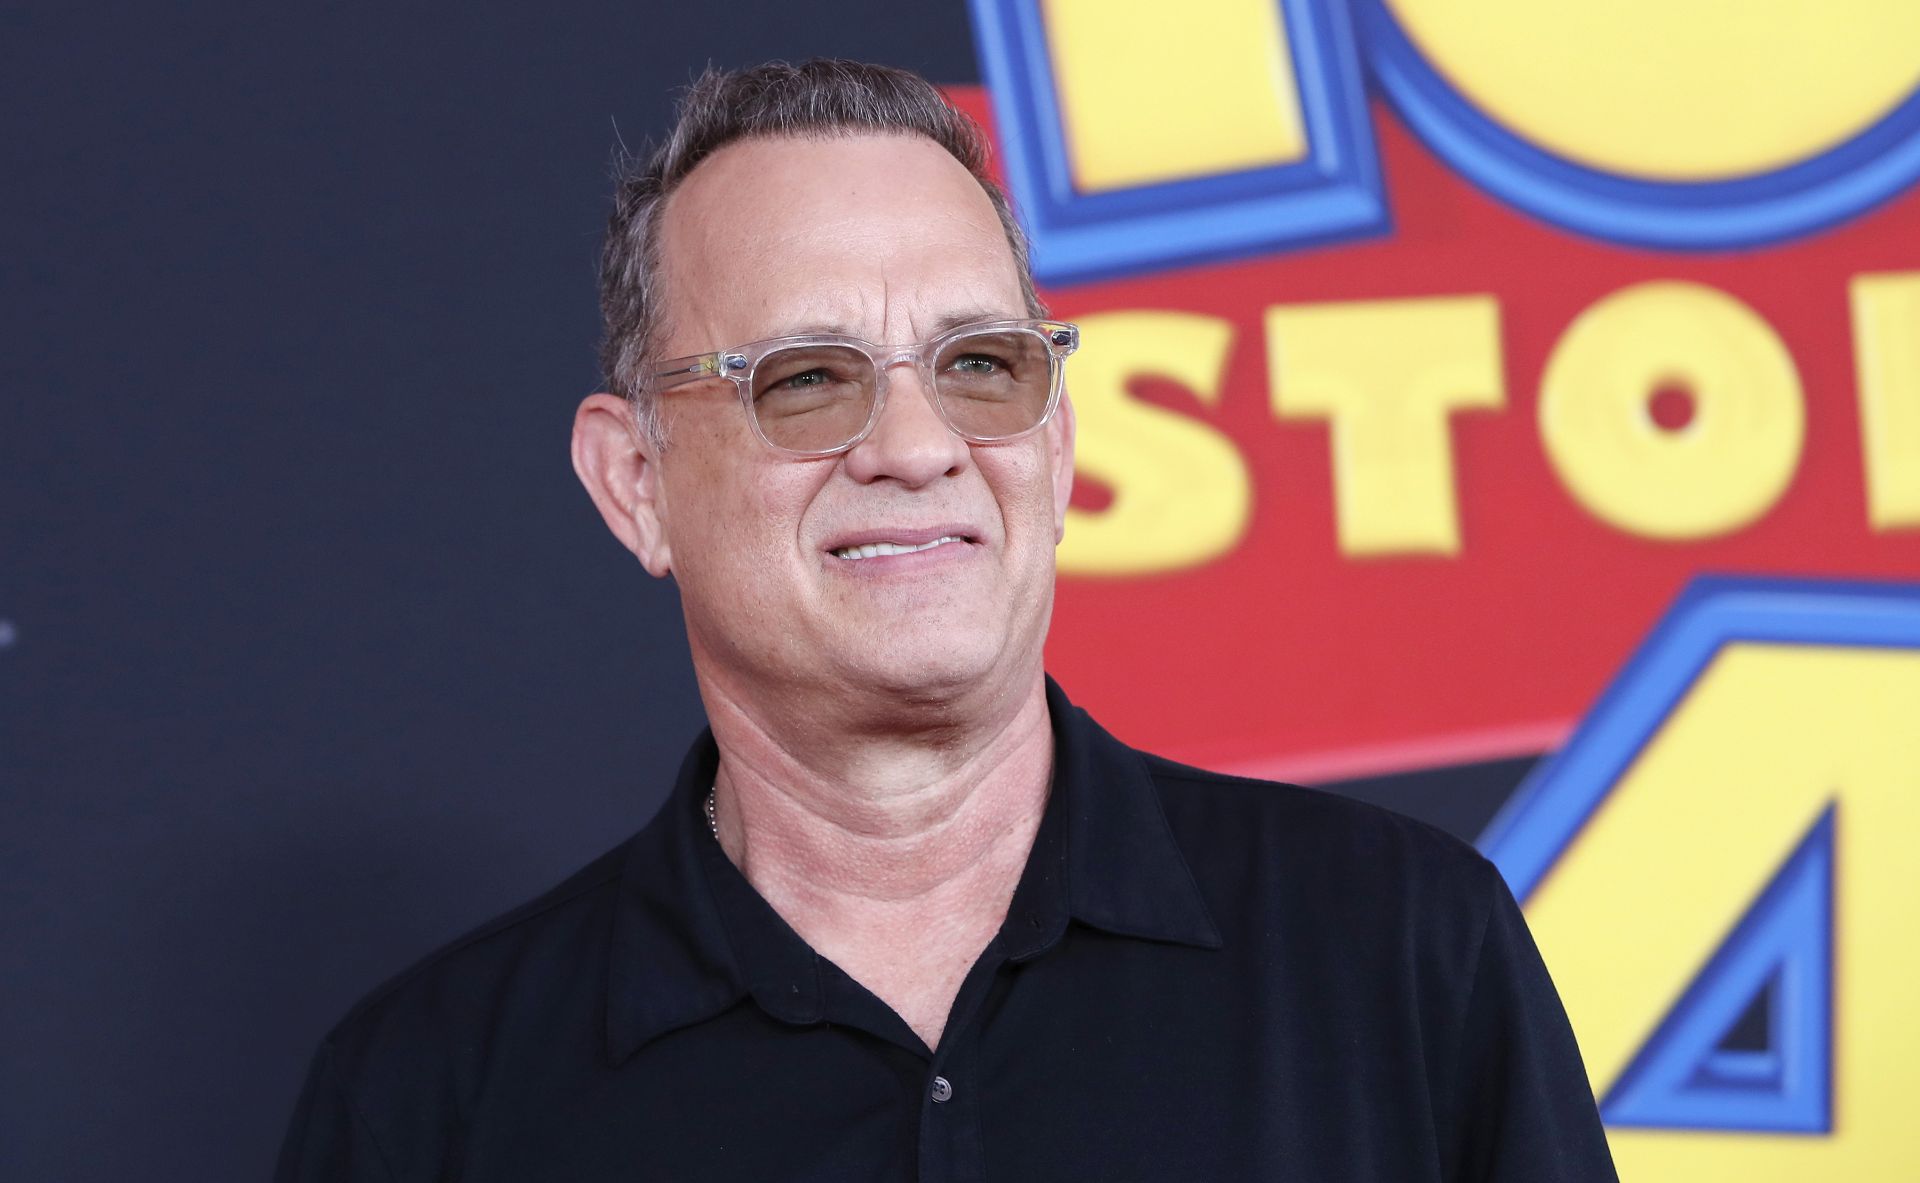 epa07642628 US actor/cast member Tom Hanks arrives for the world premiere of 'Toy Story 4' at the El Capitan Theatre in Hollywood, Los Angeles, California, USA, 11 June 2019. The movie opens in the USA on 21 June 2019.  EPA/NINA PROMMER